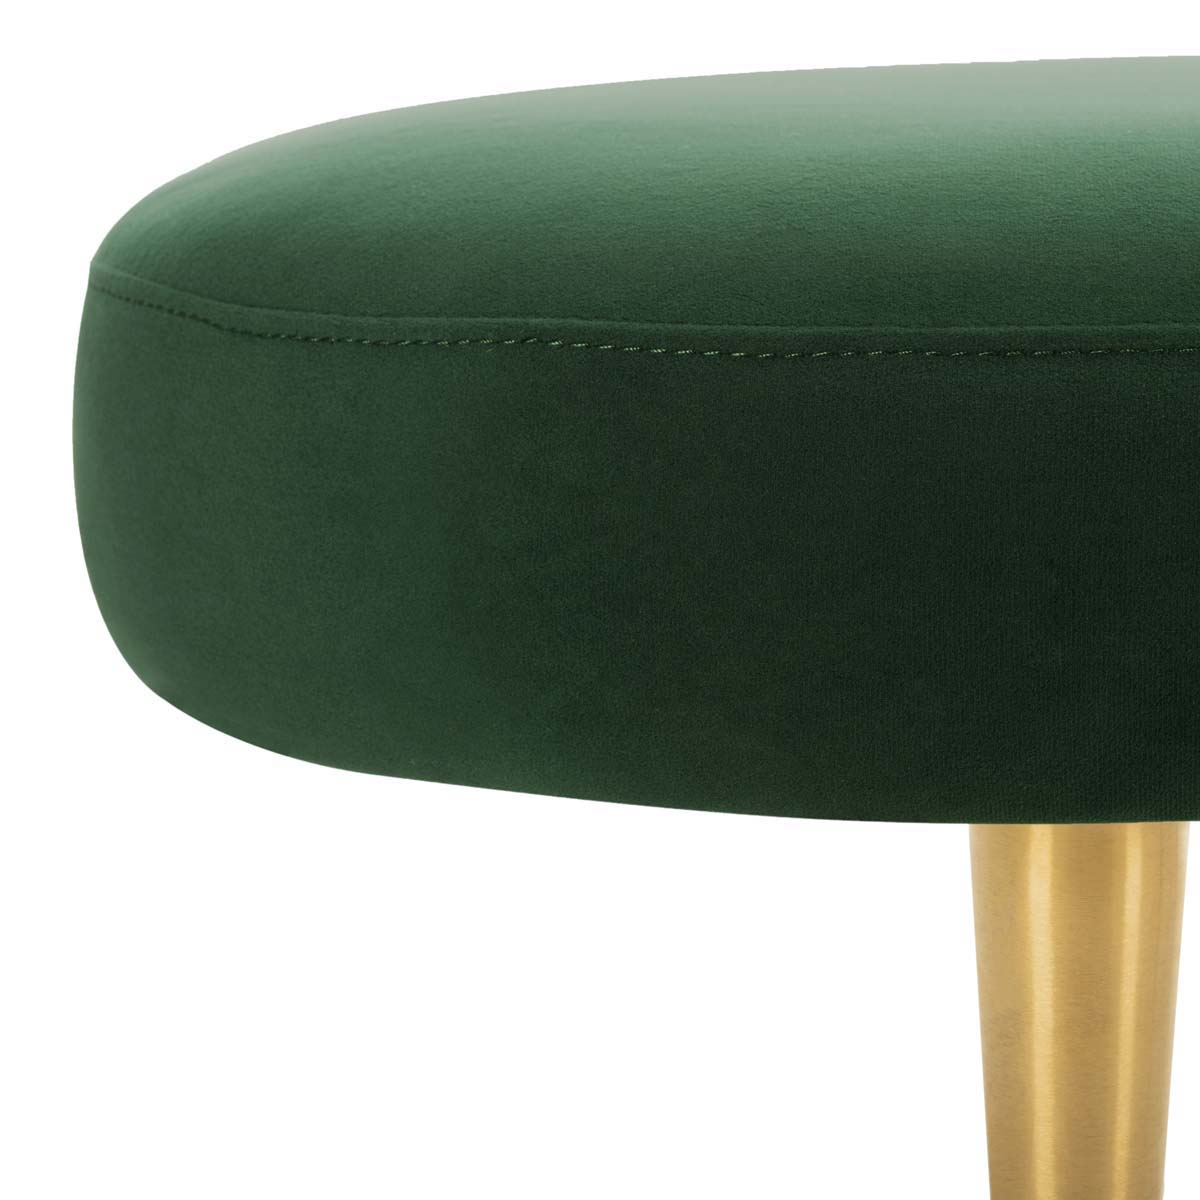 Safavieh Couture Corinne Oval Bench - Emerald